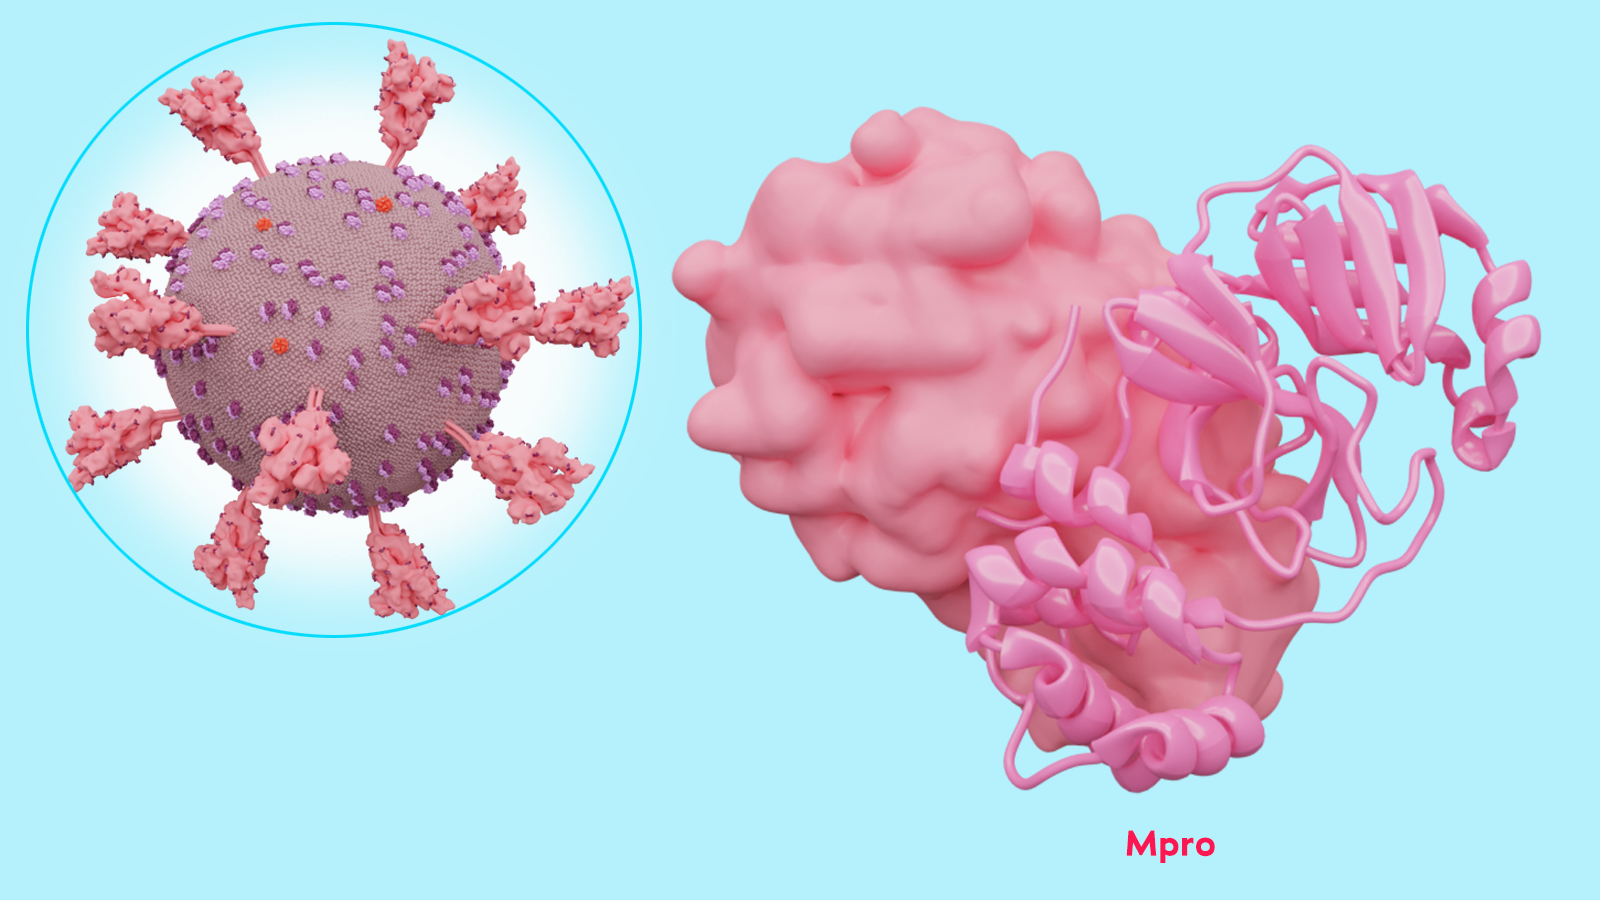 on a light blue background, an image of a coronavirus on the left and an image of the main protease (Mpro) of most coronaviruses on the right